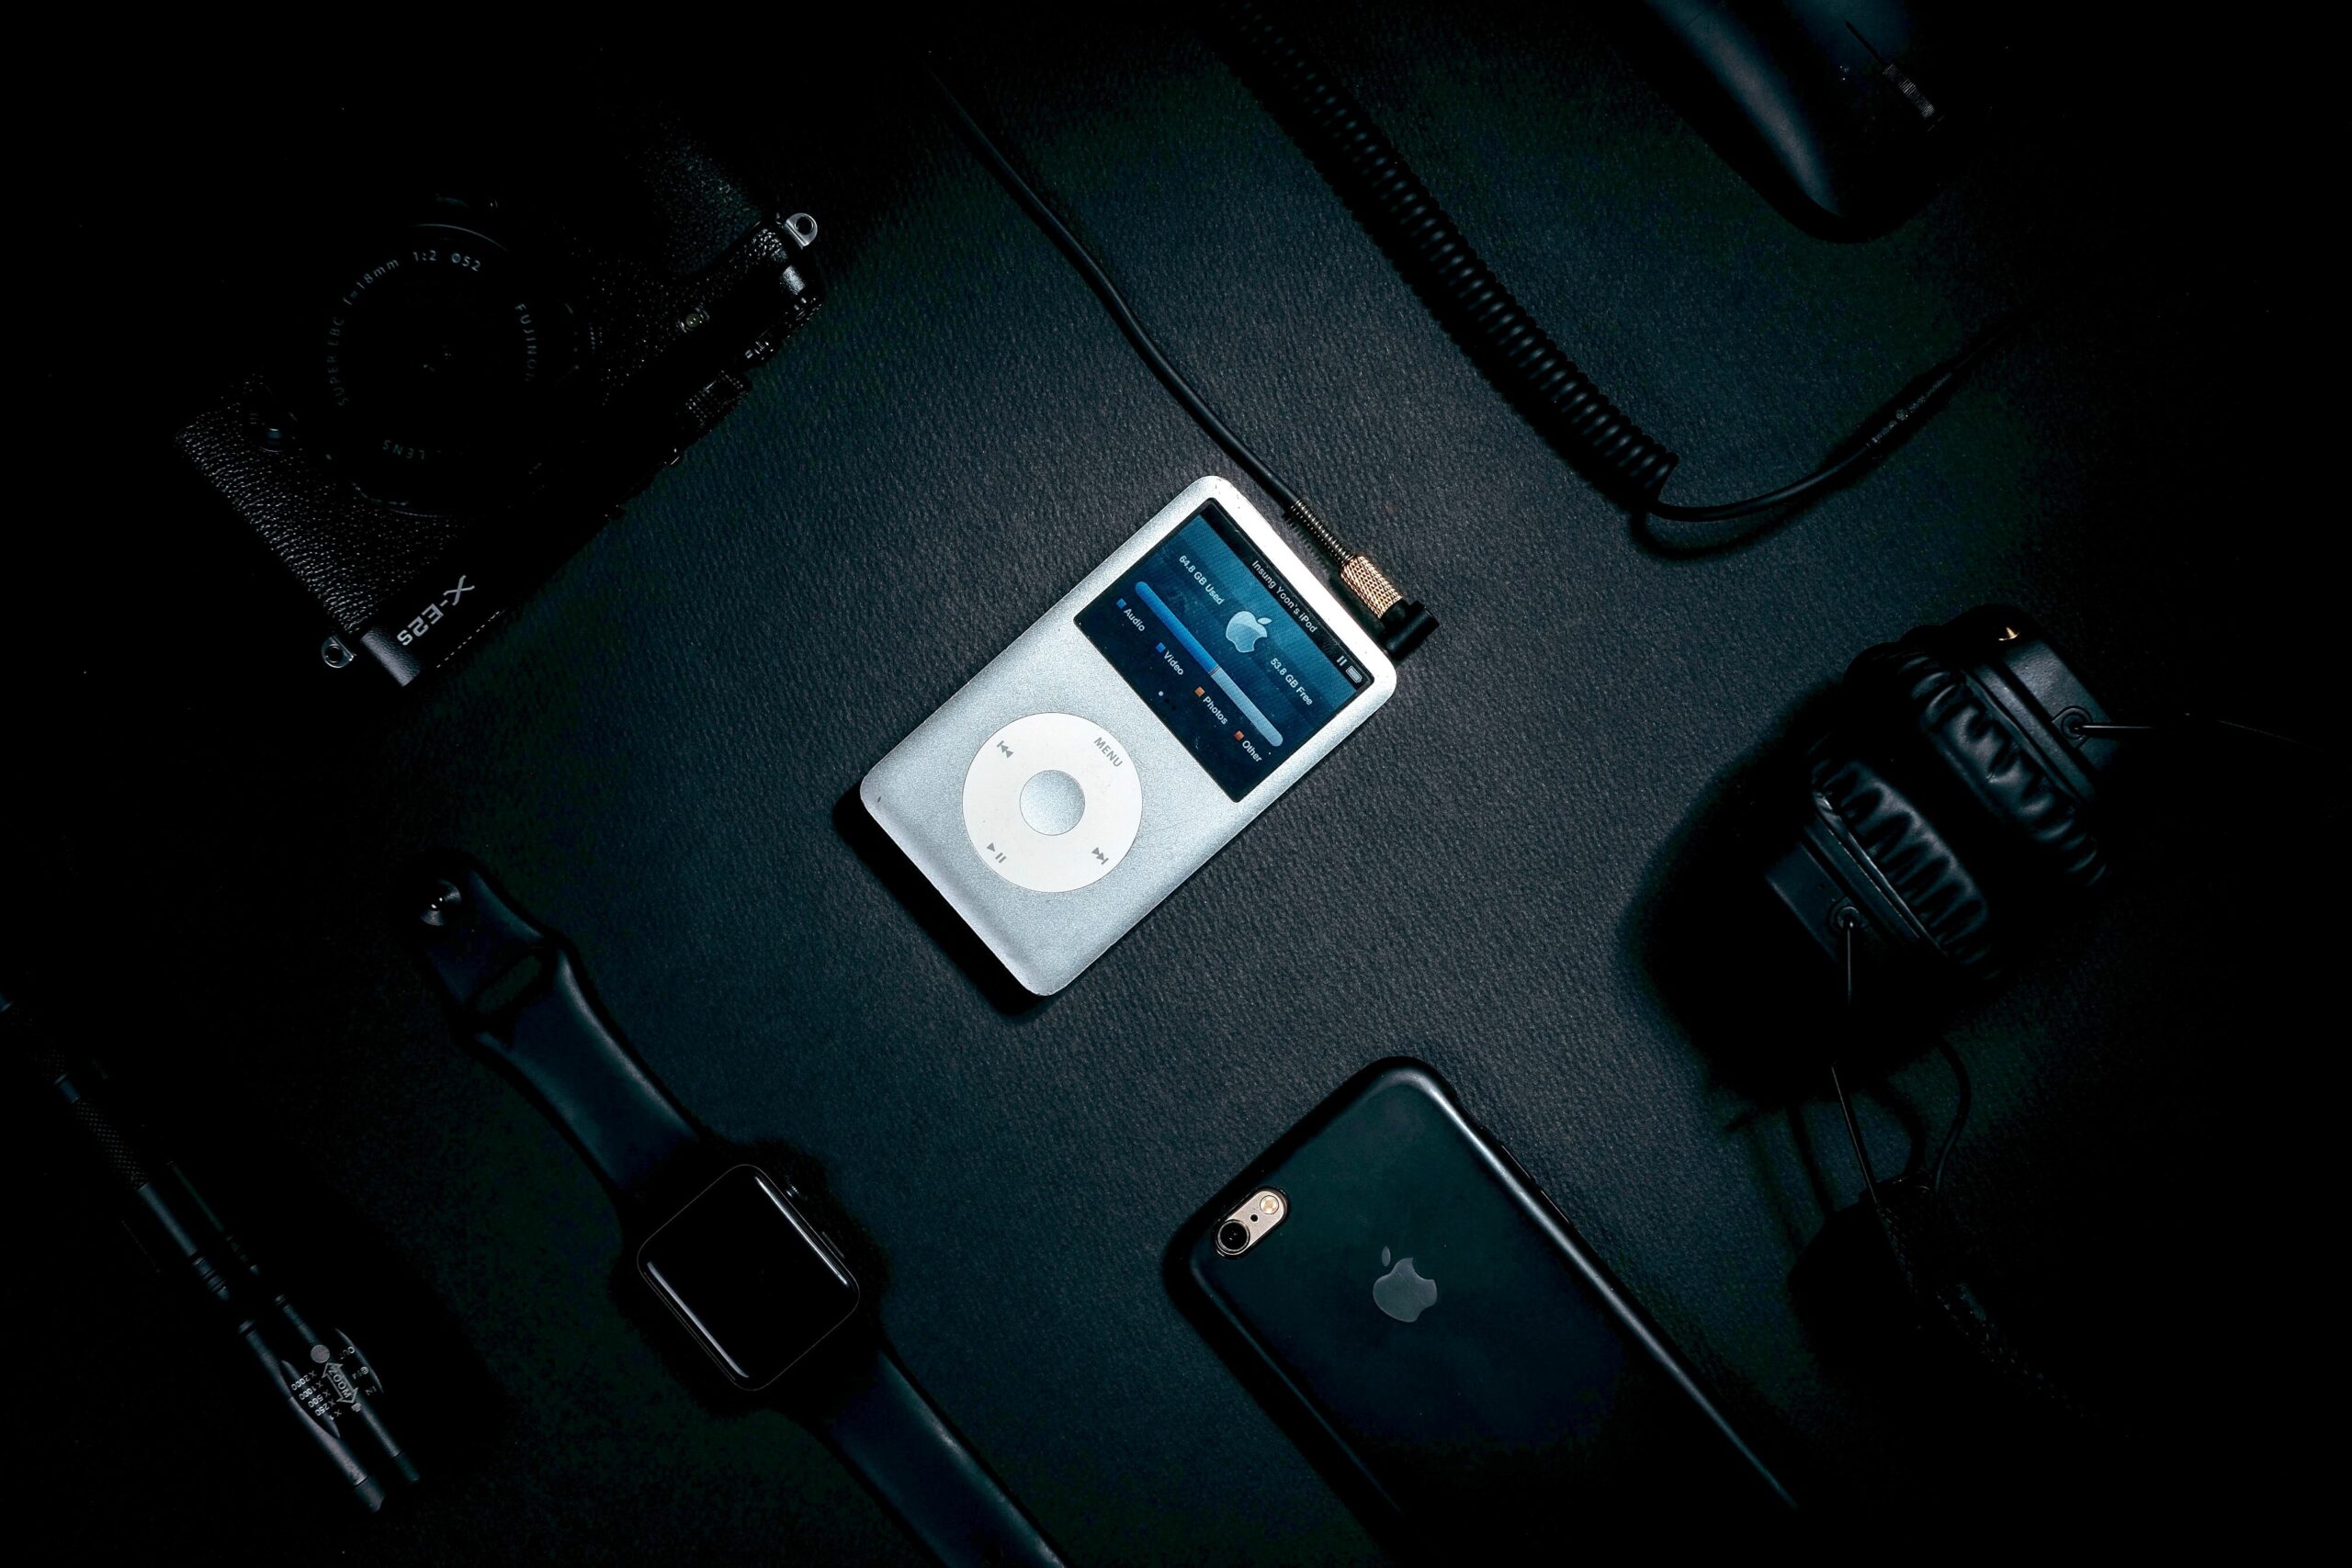 ipod in the middle of other gadgets and personal accessories